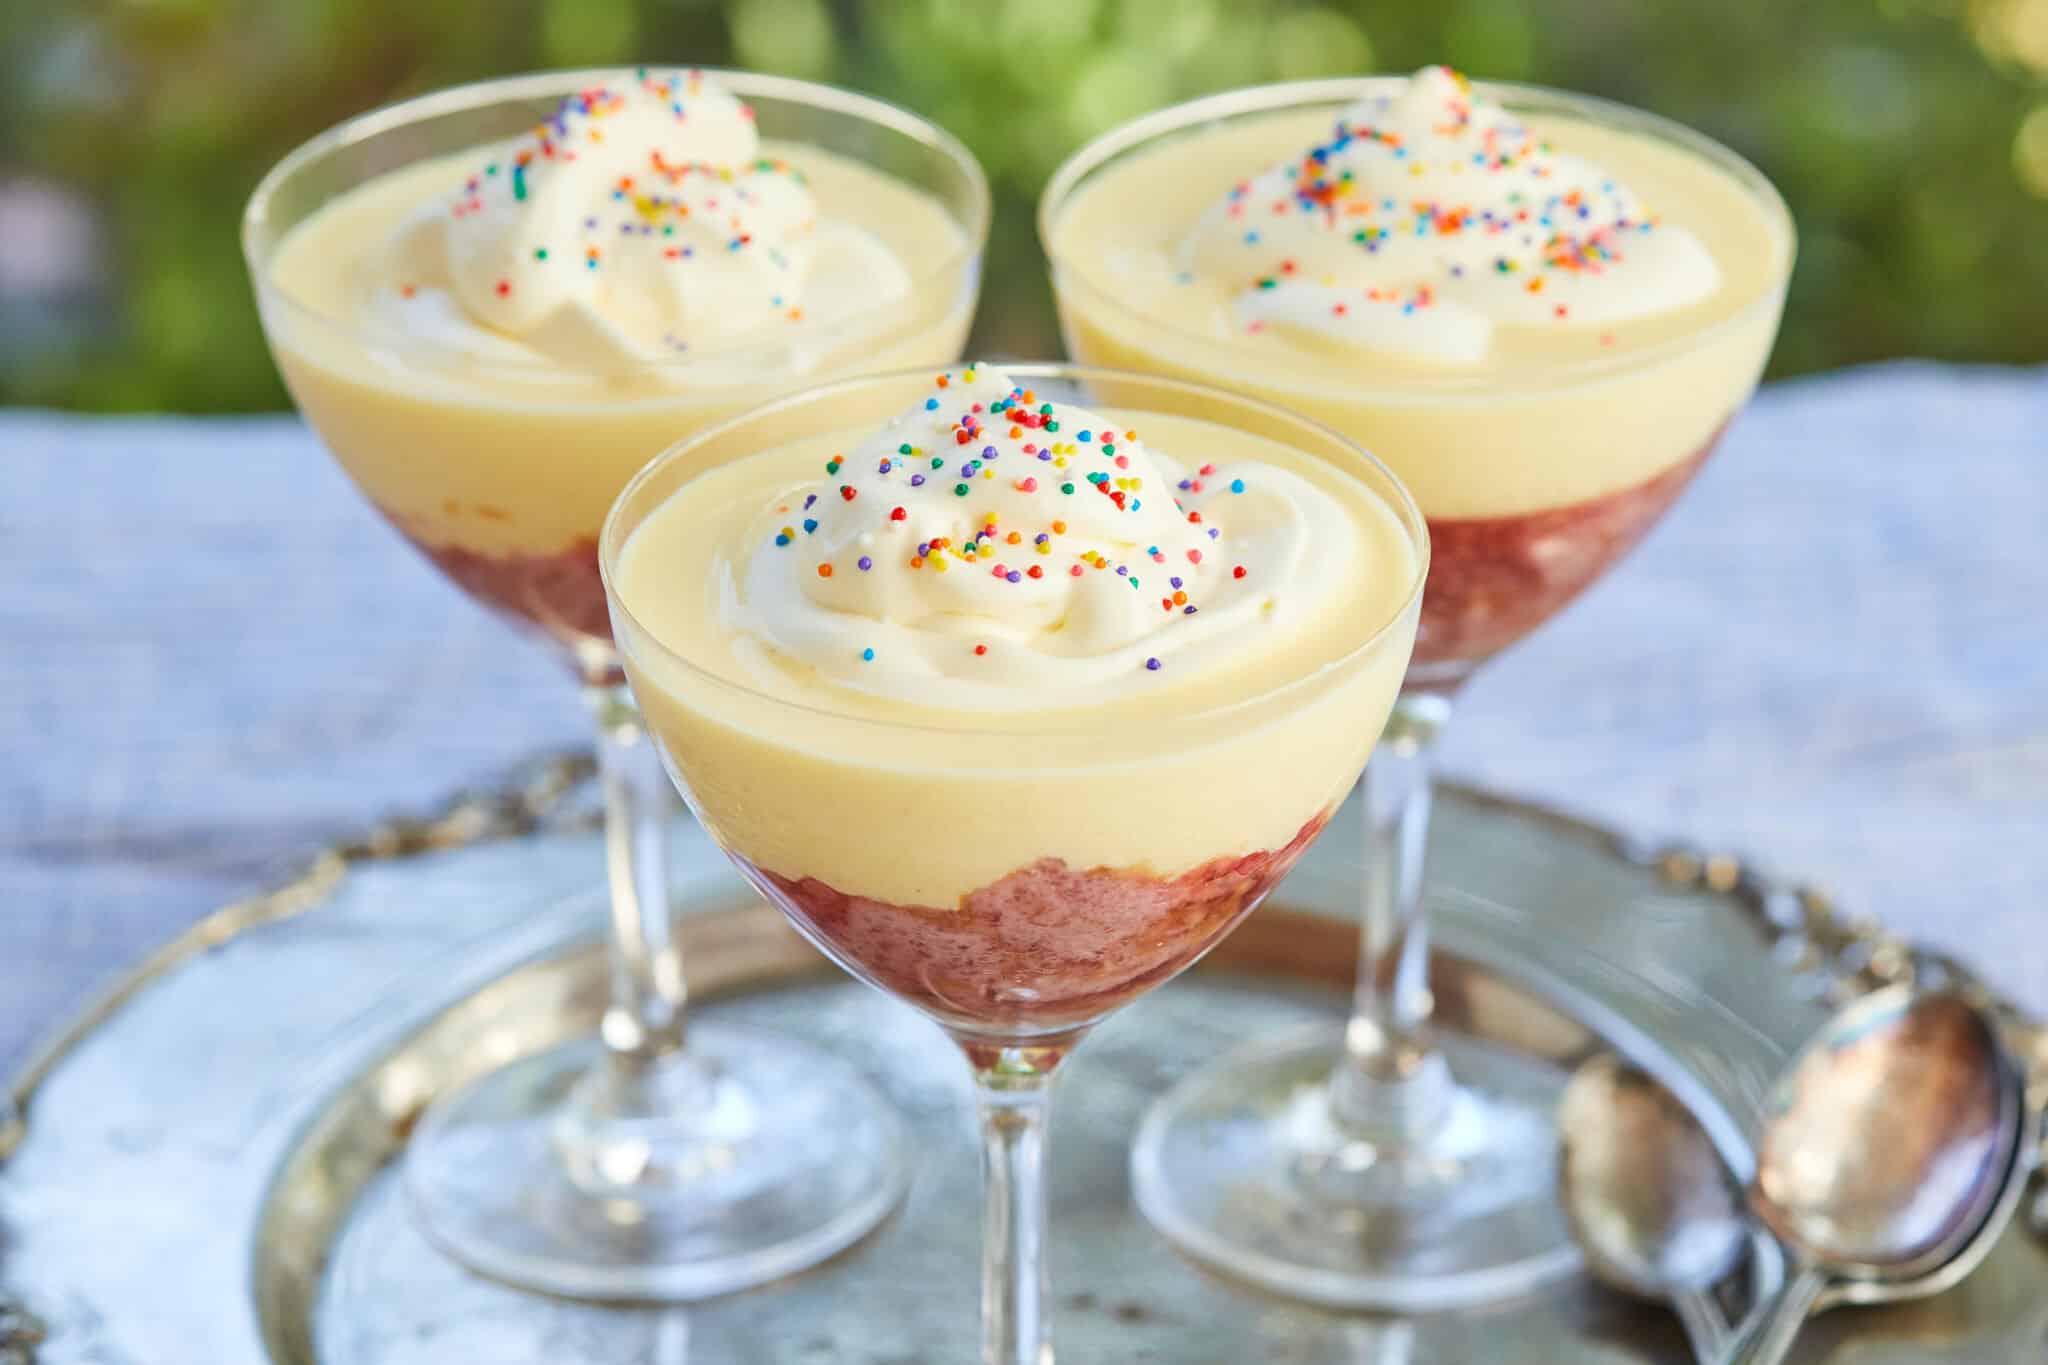 Traditional English Trifle is served in 3 glasses on a silver platter. Each Sherry trifle has a fruity raspberry jelly layer, moist sherry-infused pound cake, velvety creme anglaise, topped with light whipped cream, and colorful classic sprinkles.